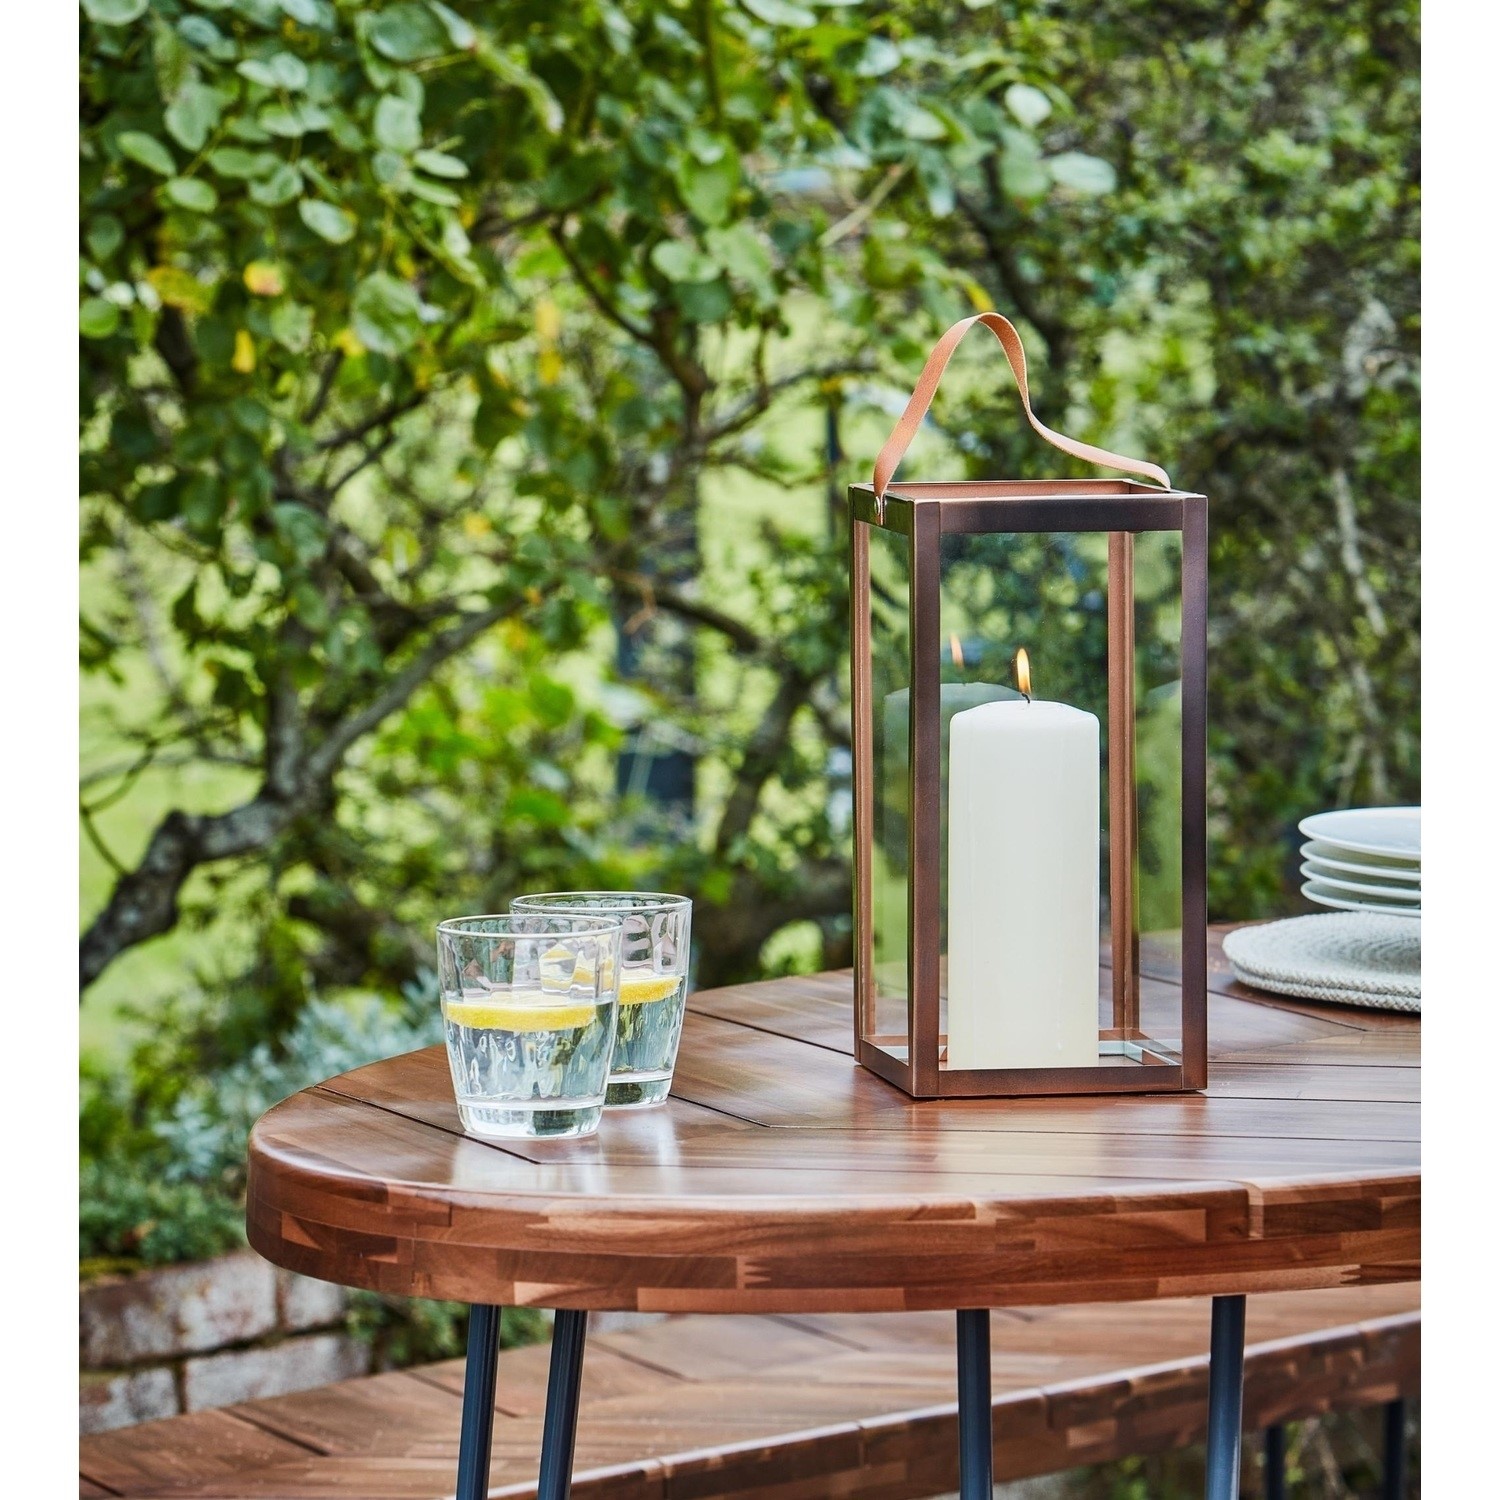 Read more about Ivyline small tall copper outdoor lantern hampton